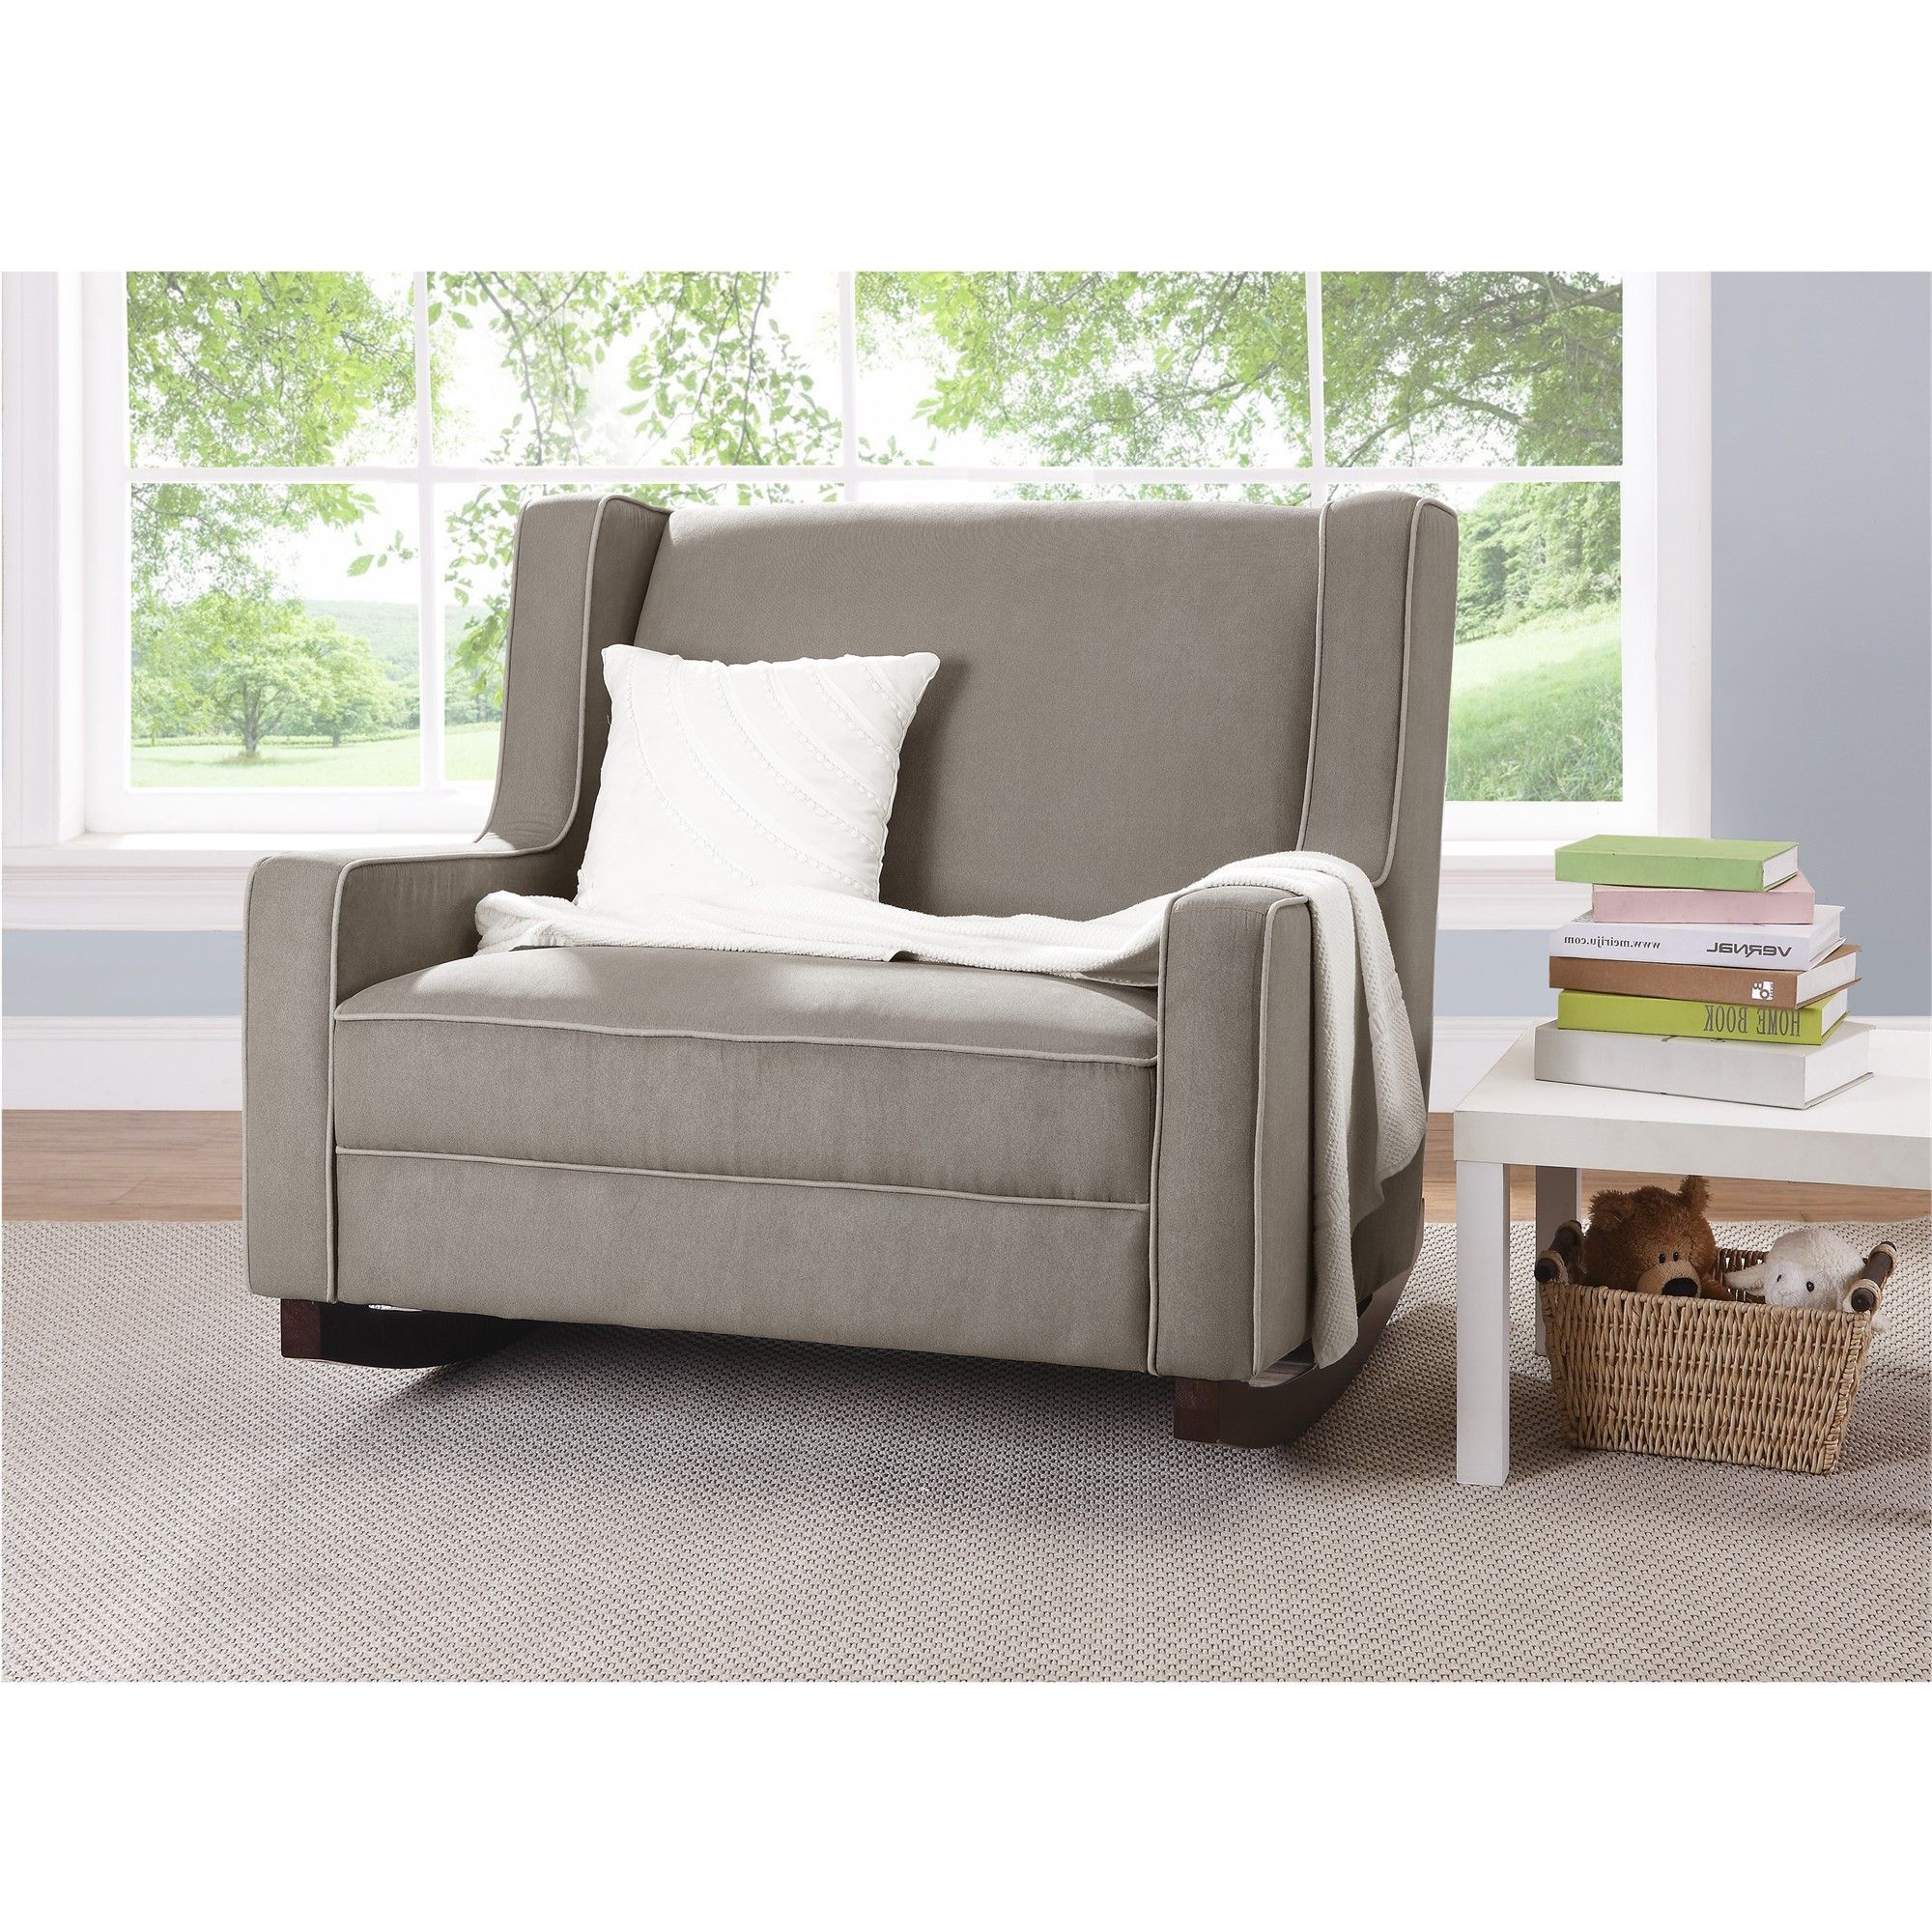 Trendy Chair: Captivating Double Glider Nursery With Comfortable In Double Glider Loveseats (View 23 of 30)